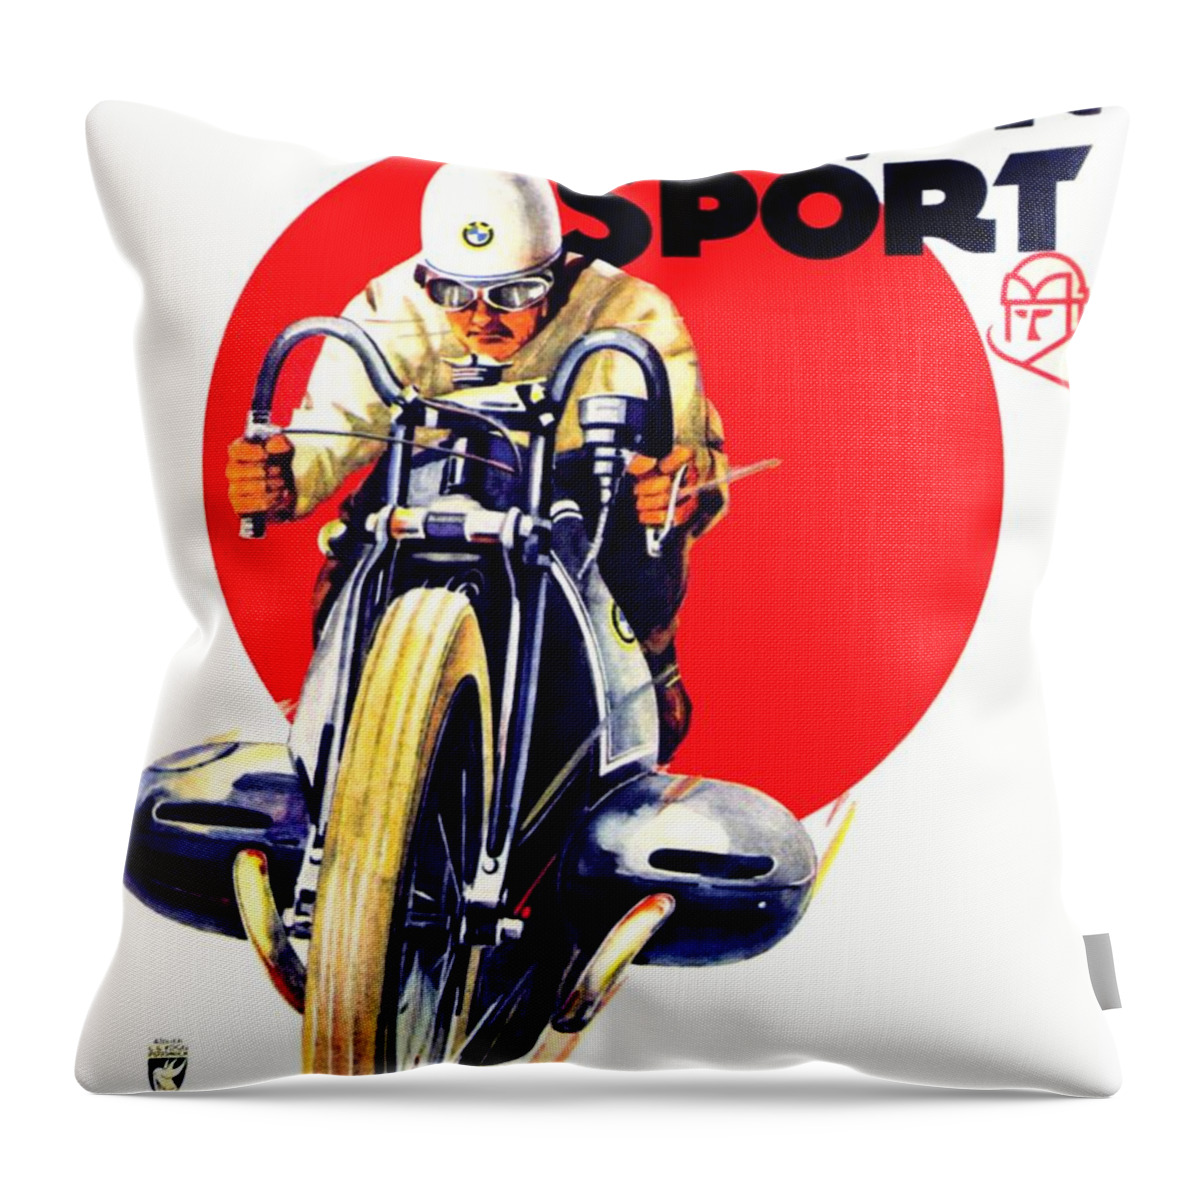 1929 Throw Pillow featuring the digital art 1929 - BMW Motorcycle Poster - Color by John Madison